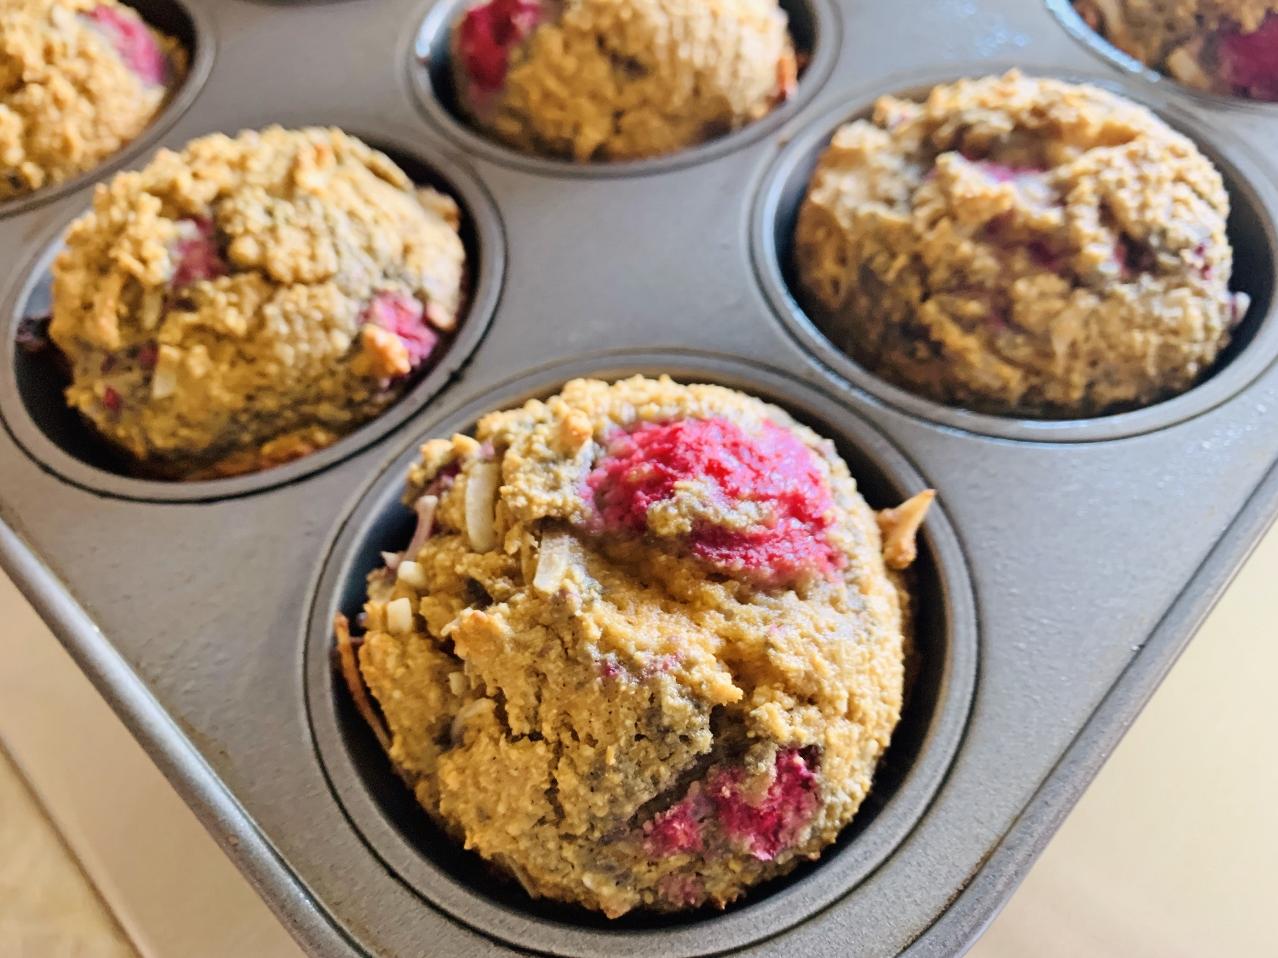  These muffins are proof that gluten-free and dairy-free can be just as delicious!